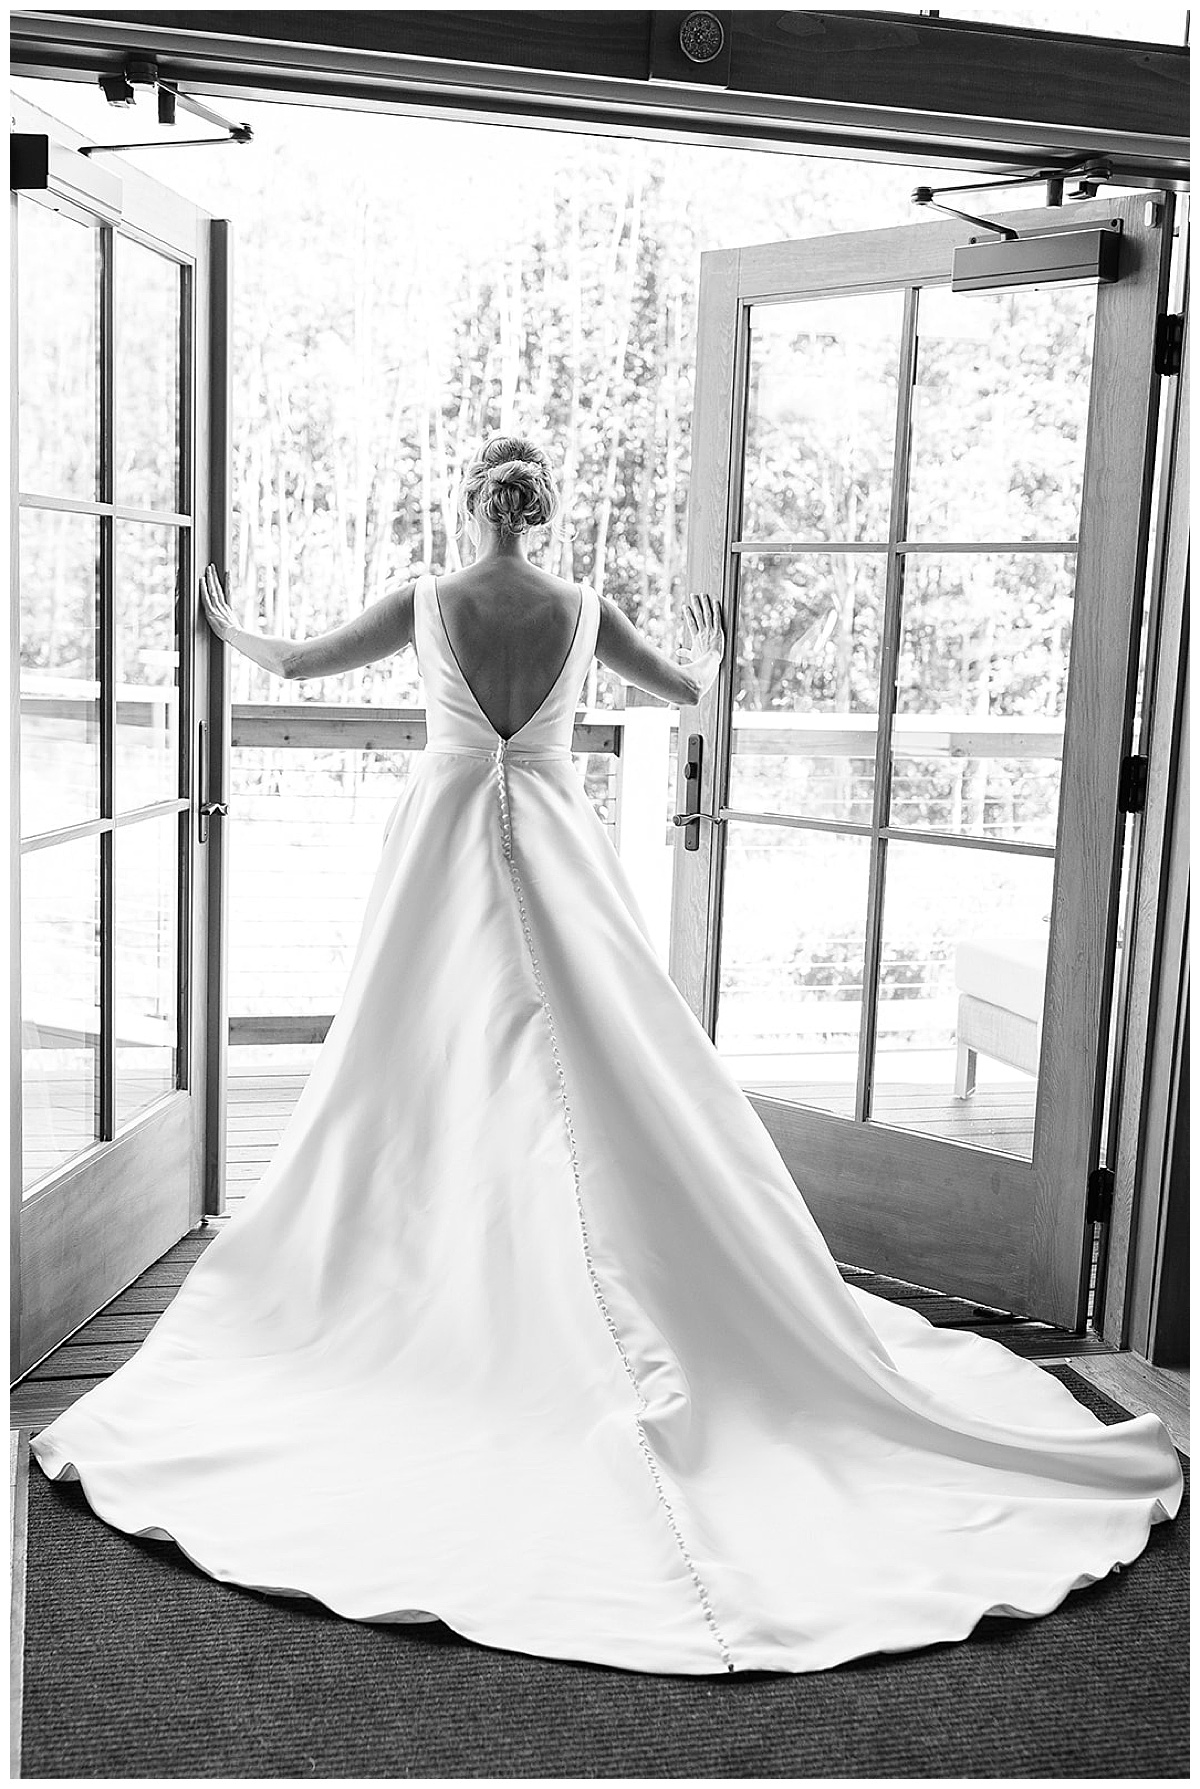 Bridal gown by Detroit Wedding Photographer